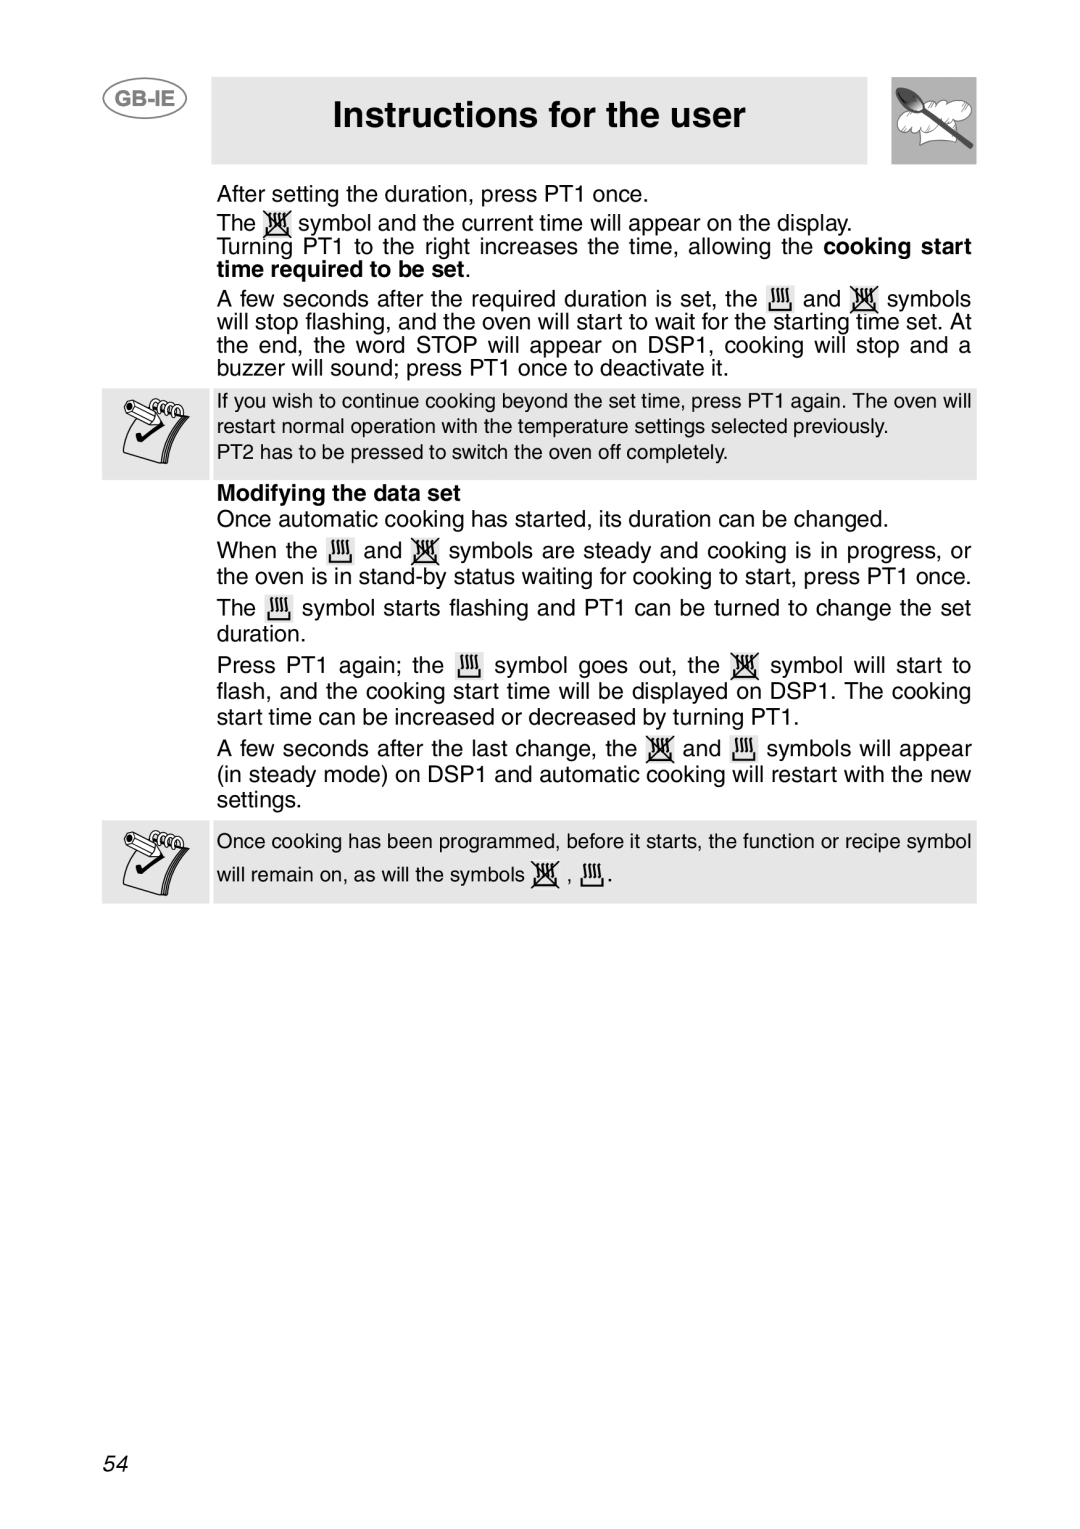 Smeg SC112-2 manual Instructions for the user, After setting the duration, press PT1 once, Modifying the data set 